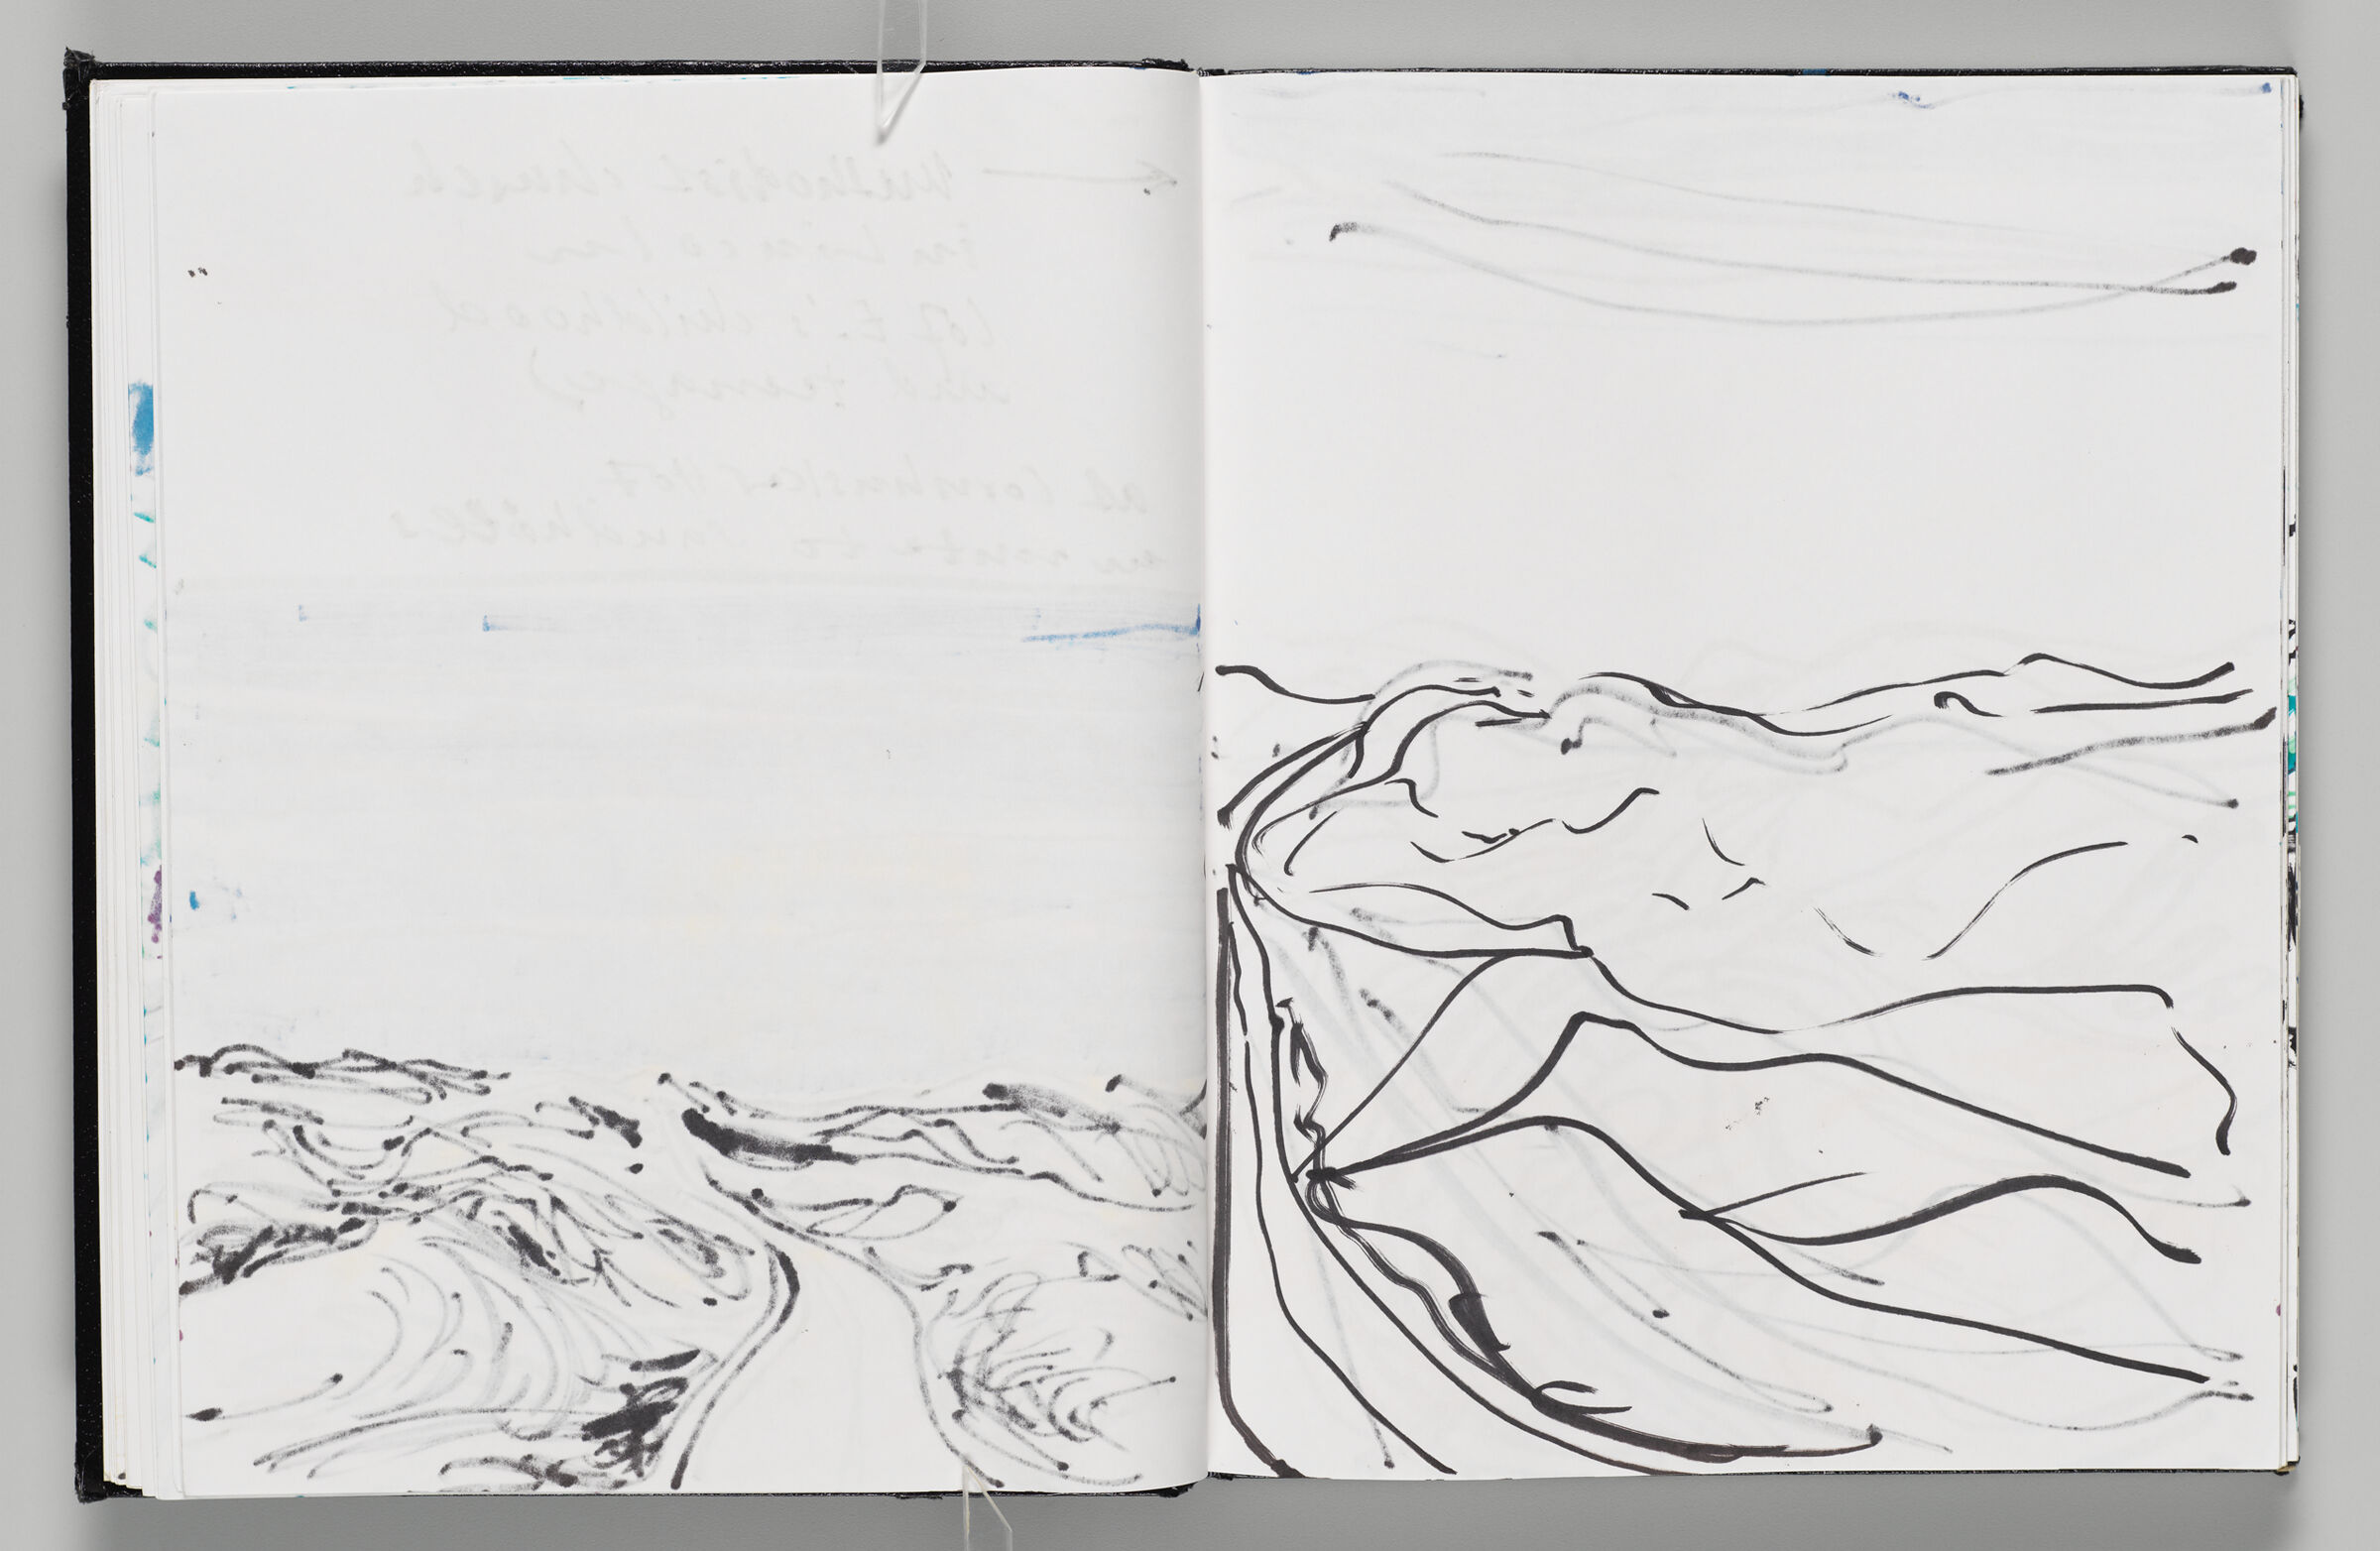 Untitled (Bleed-Through Of Previous Page, Left Page); Untitled (Sandhills, Right Page)